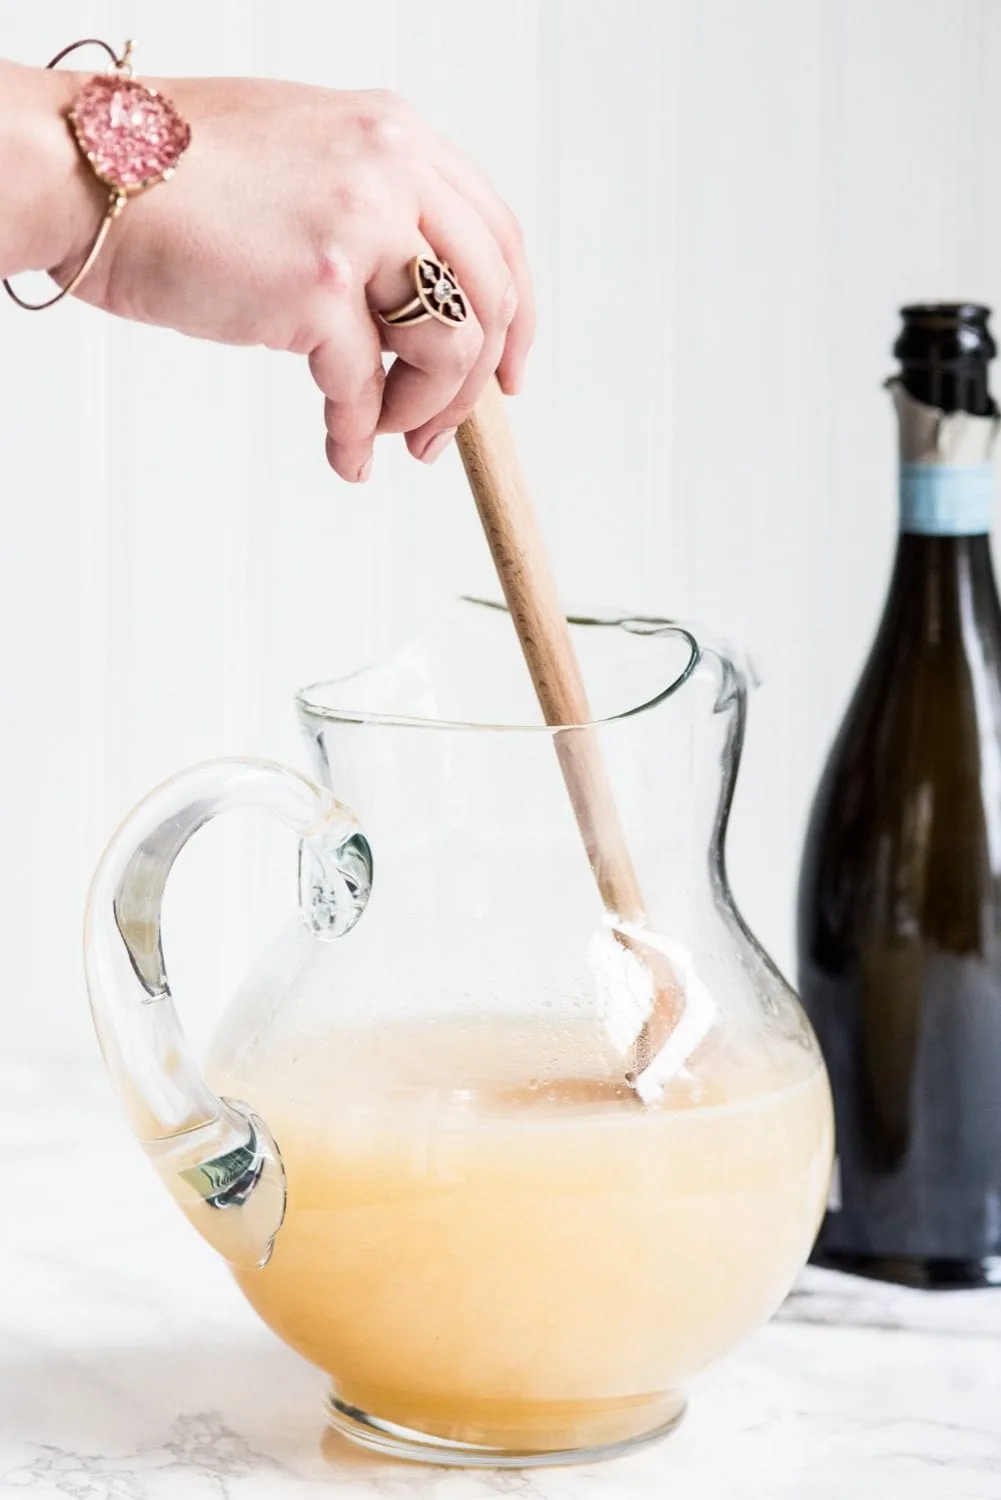 Fizzy Spiked Pear Punch Champagne Cocktail | Cocktail recipes, entertaining ideas, party recipes, party ideas and more from @cydconverse